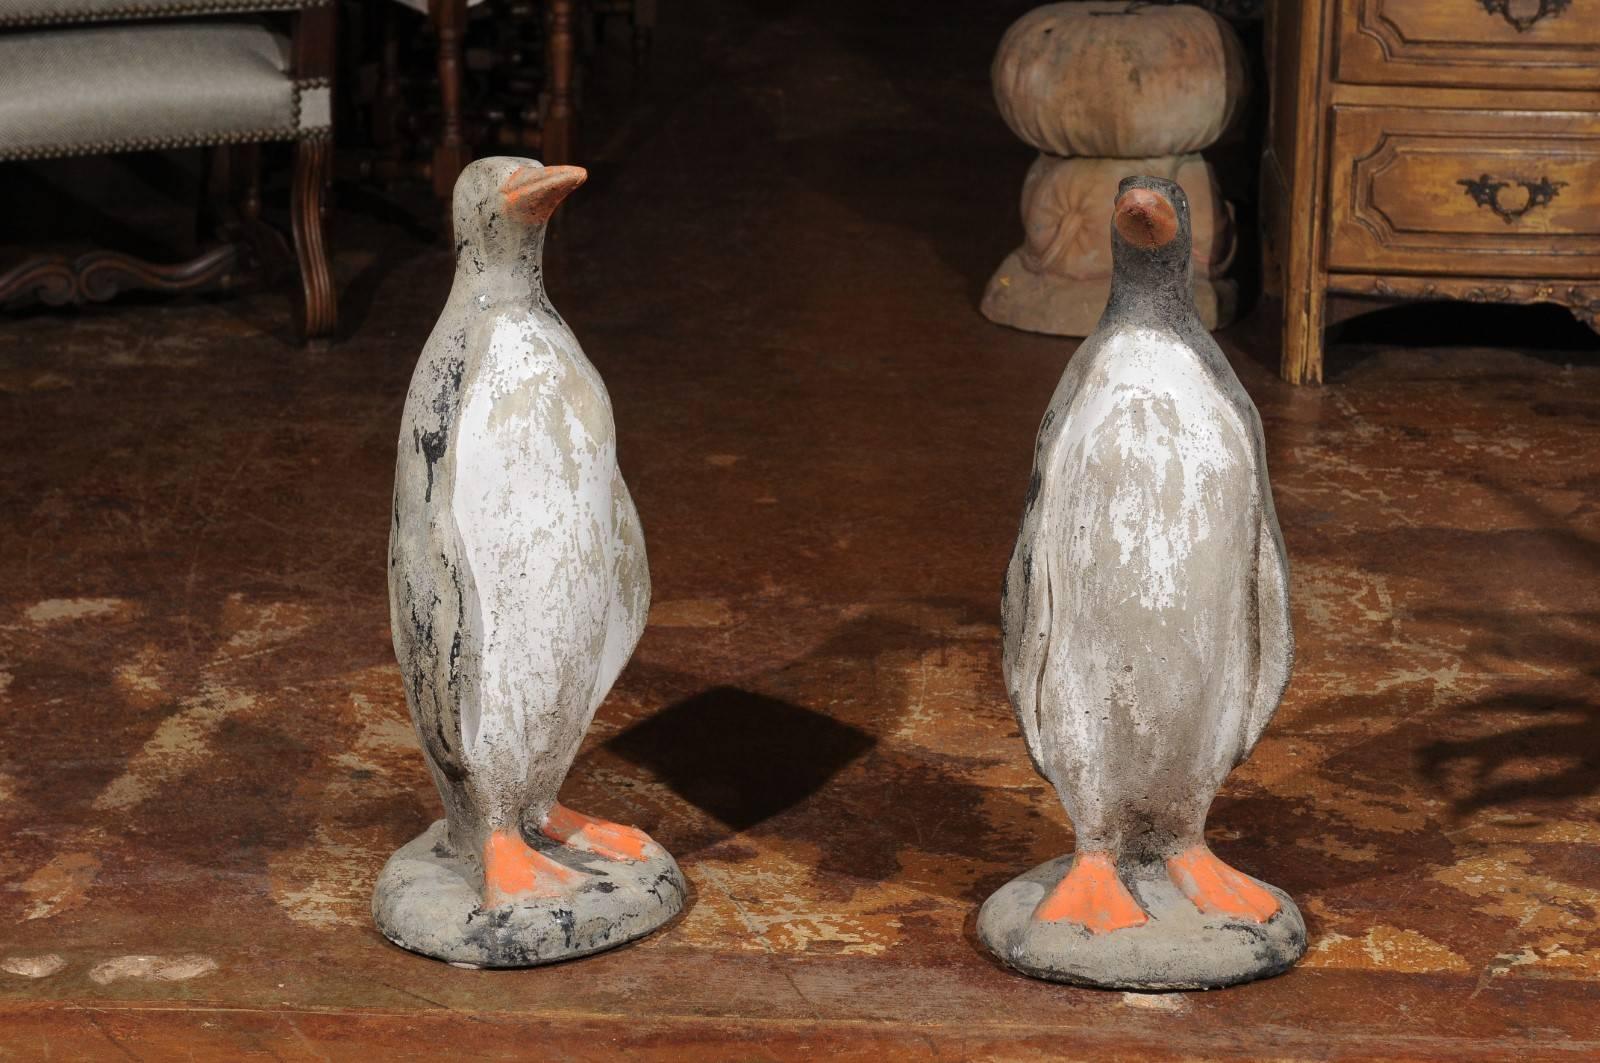 A pair of French lifesize painted stone penguins sculptures from the 19th century on circular bases. Each of this pair of French penguins shows a beautifully weathered appearance, made of white, black and grey tones accented by orange splashes of